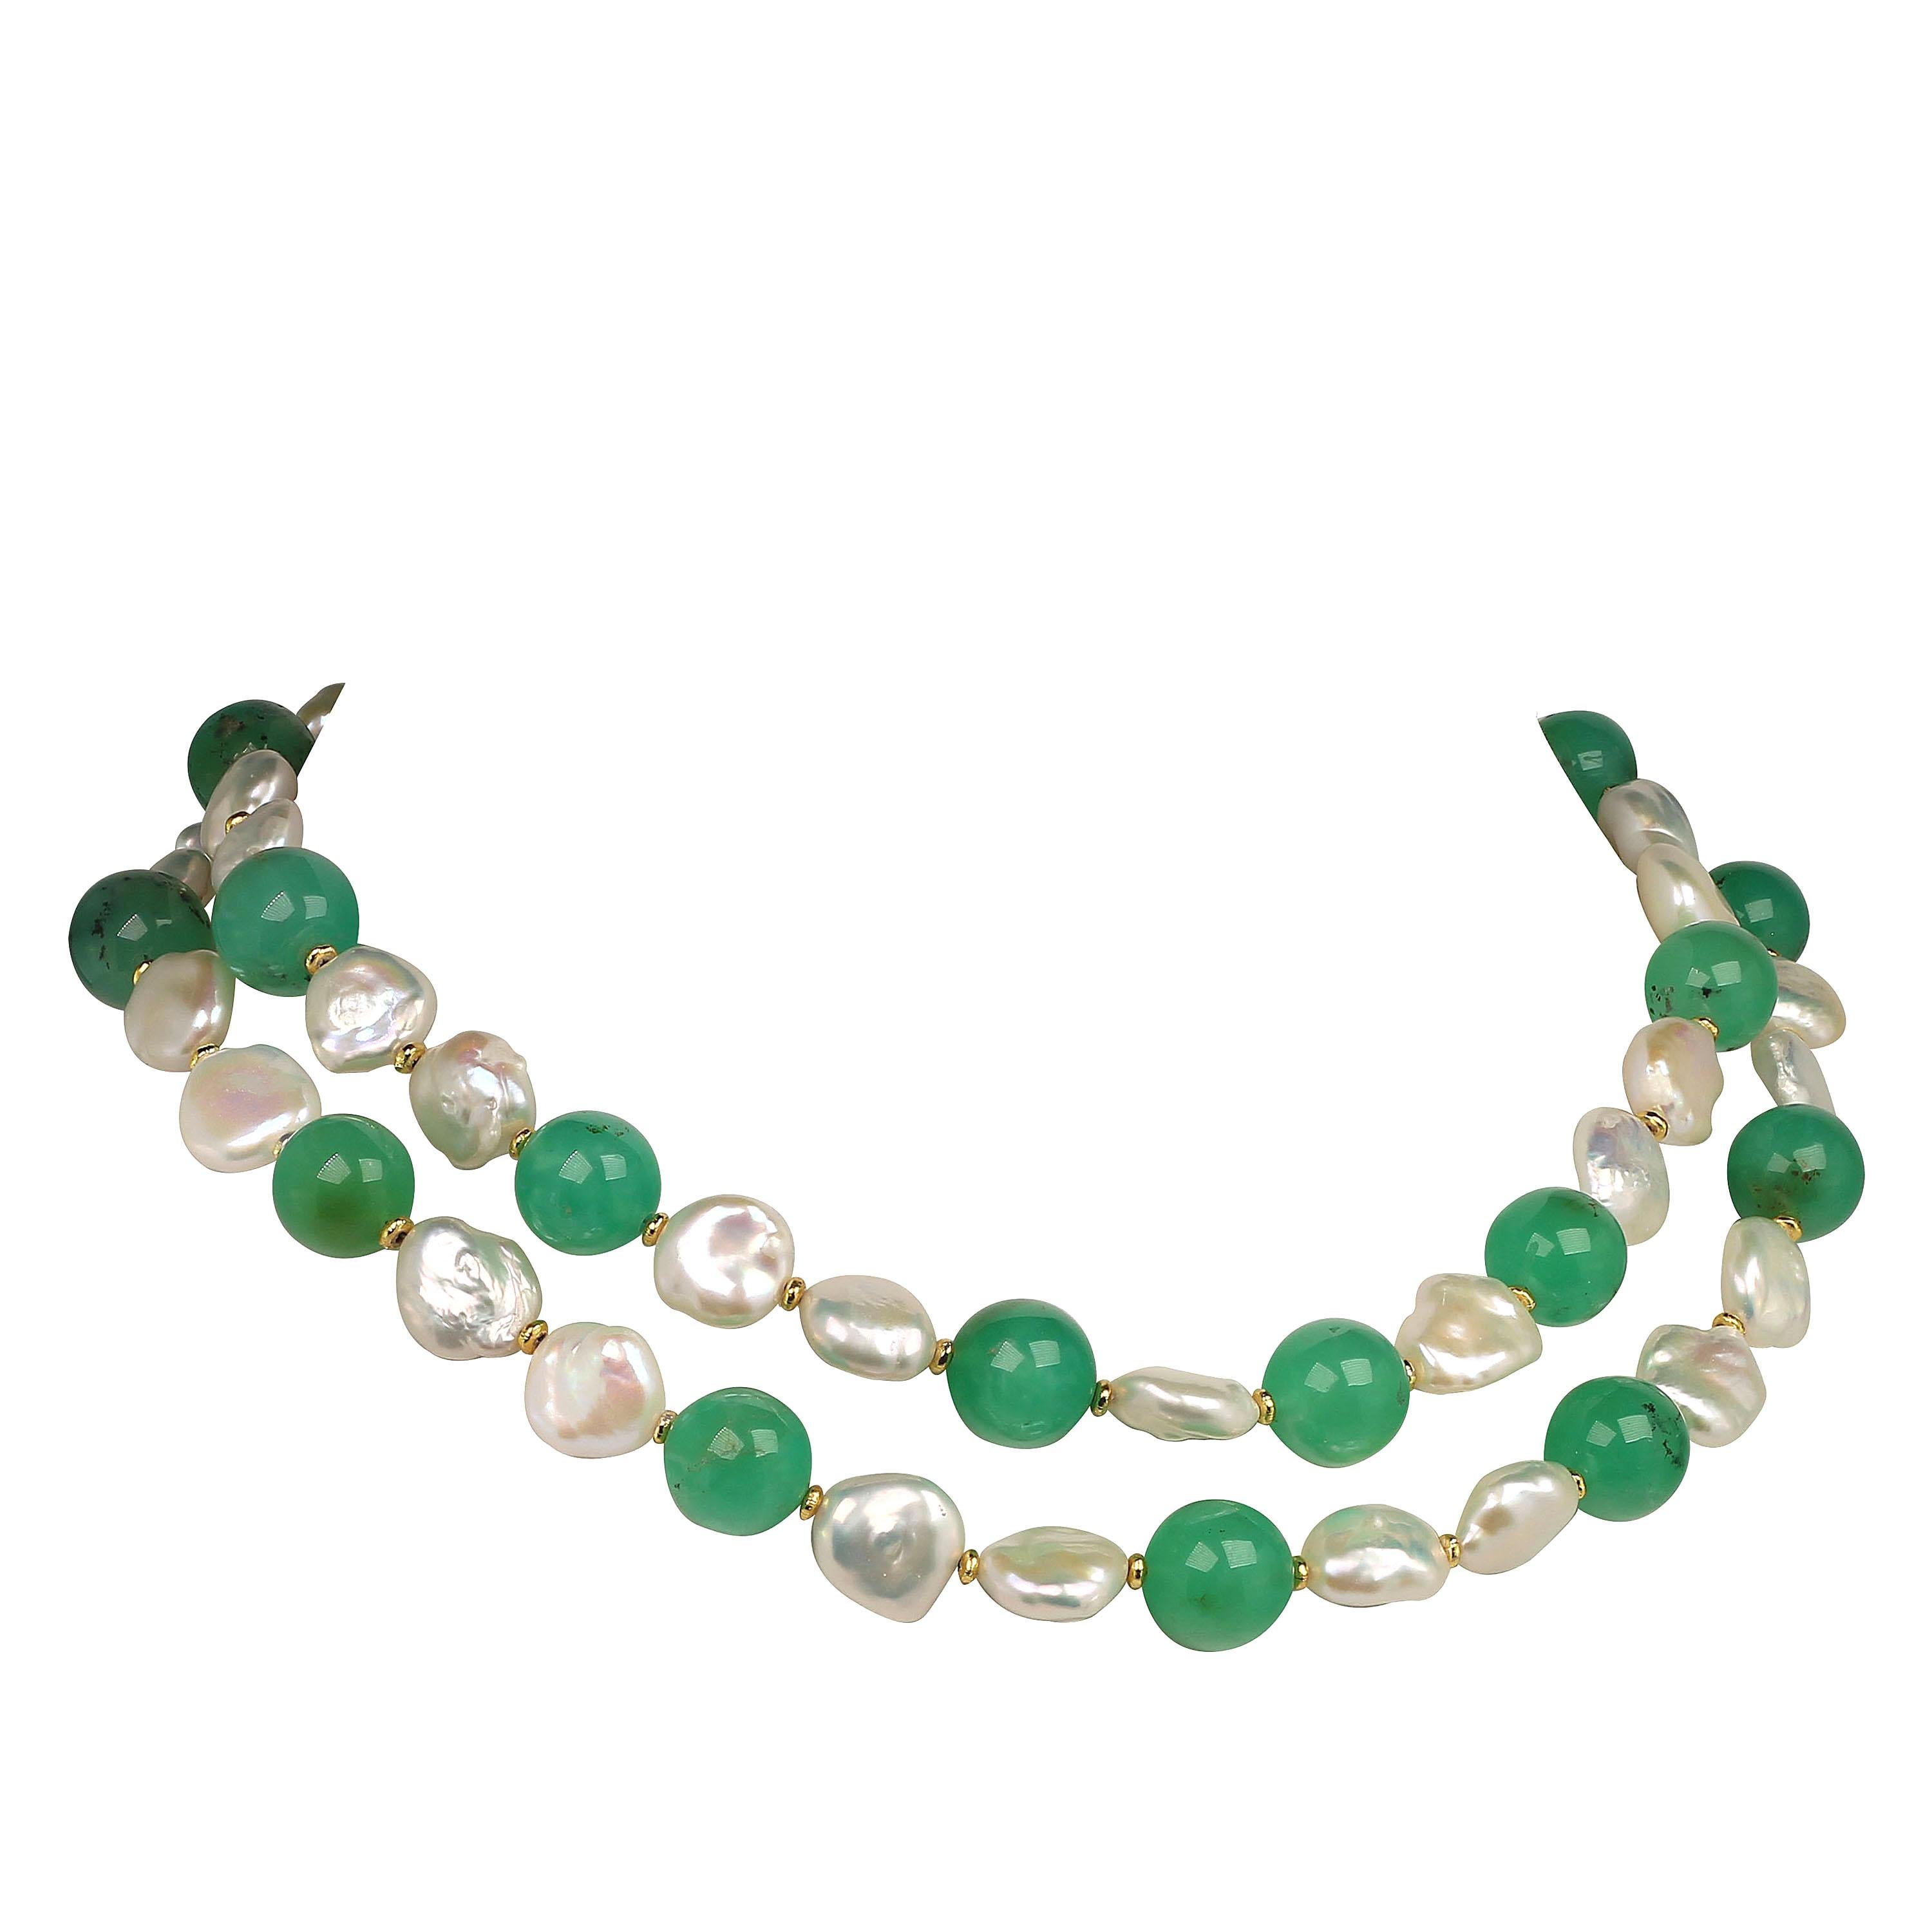 Own the jewelry you desire

Handmade, iridescent white Baroque Pearl and green Chrysoprase double strand choker necklace.  Wow!  This unique double strand choker style necklace is perfect in color and size.  At 15.5 and 16.5 inches the two strands